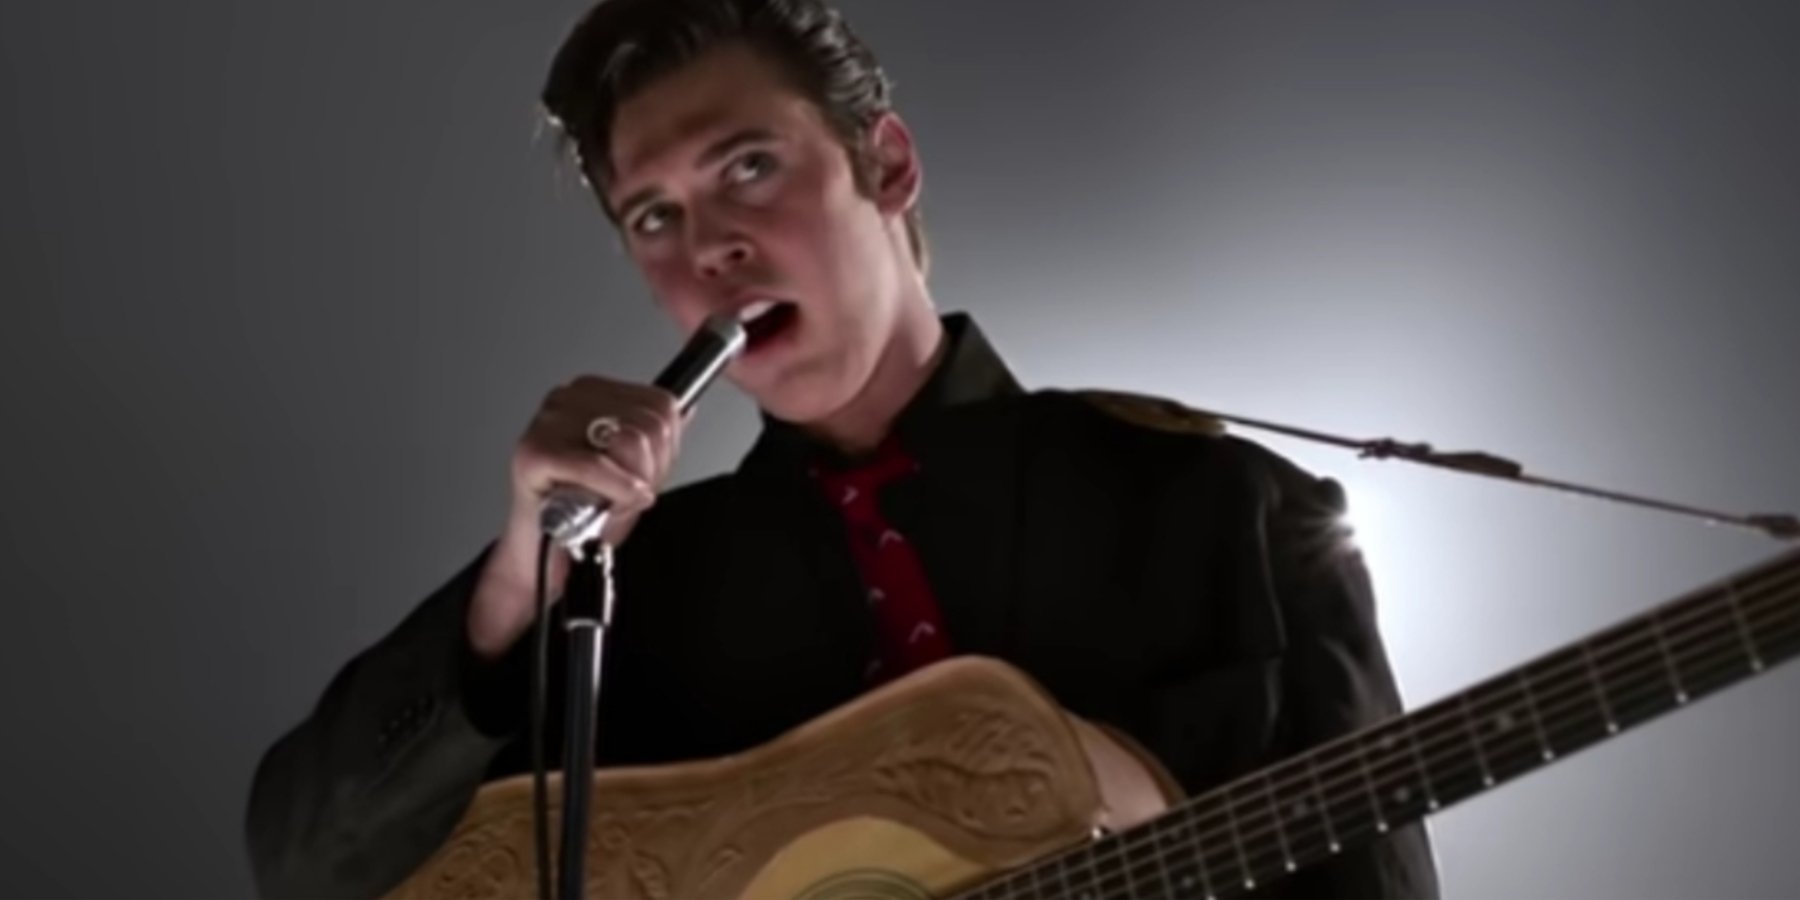 The Real Reason ‘Elvis’ Producers Cut Austin Butler’s Version of Dolly Parton’s ‘I Will Always Love You’ From the Finished Film